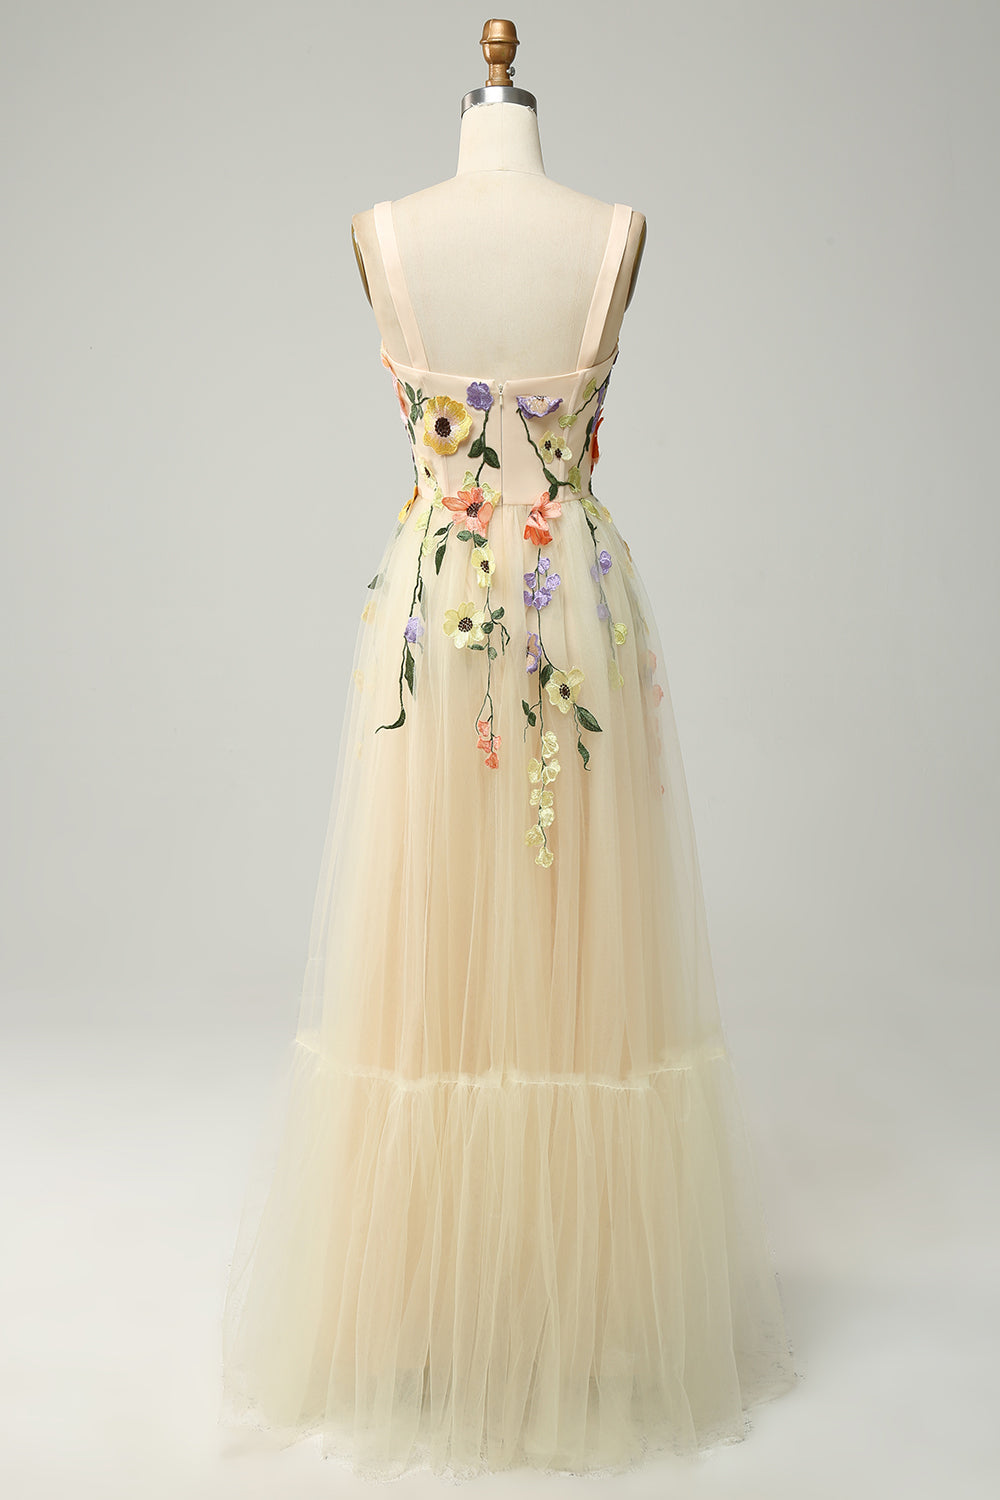 A-Line Flower Champagne Prom Dress